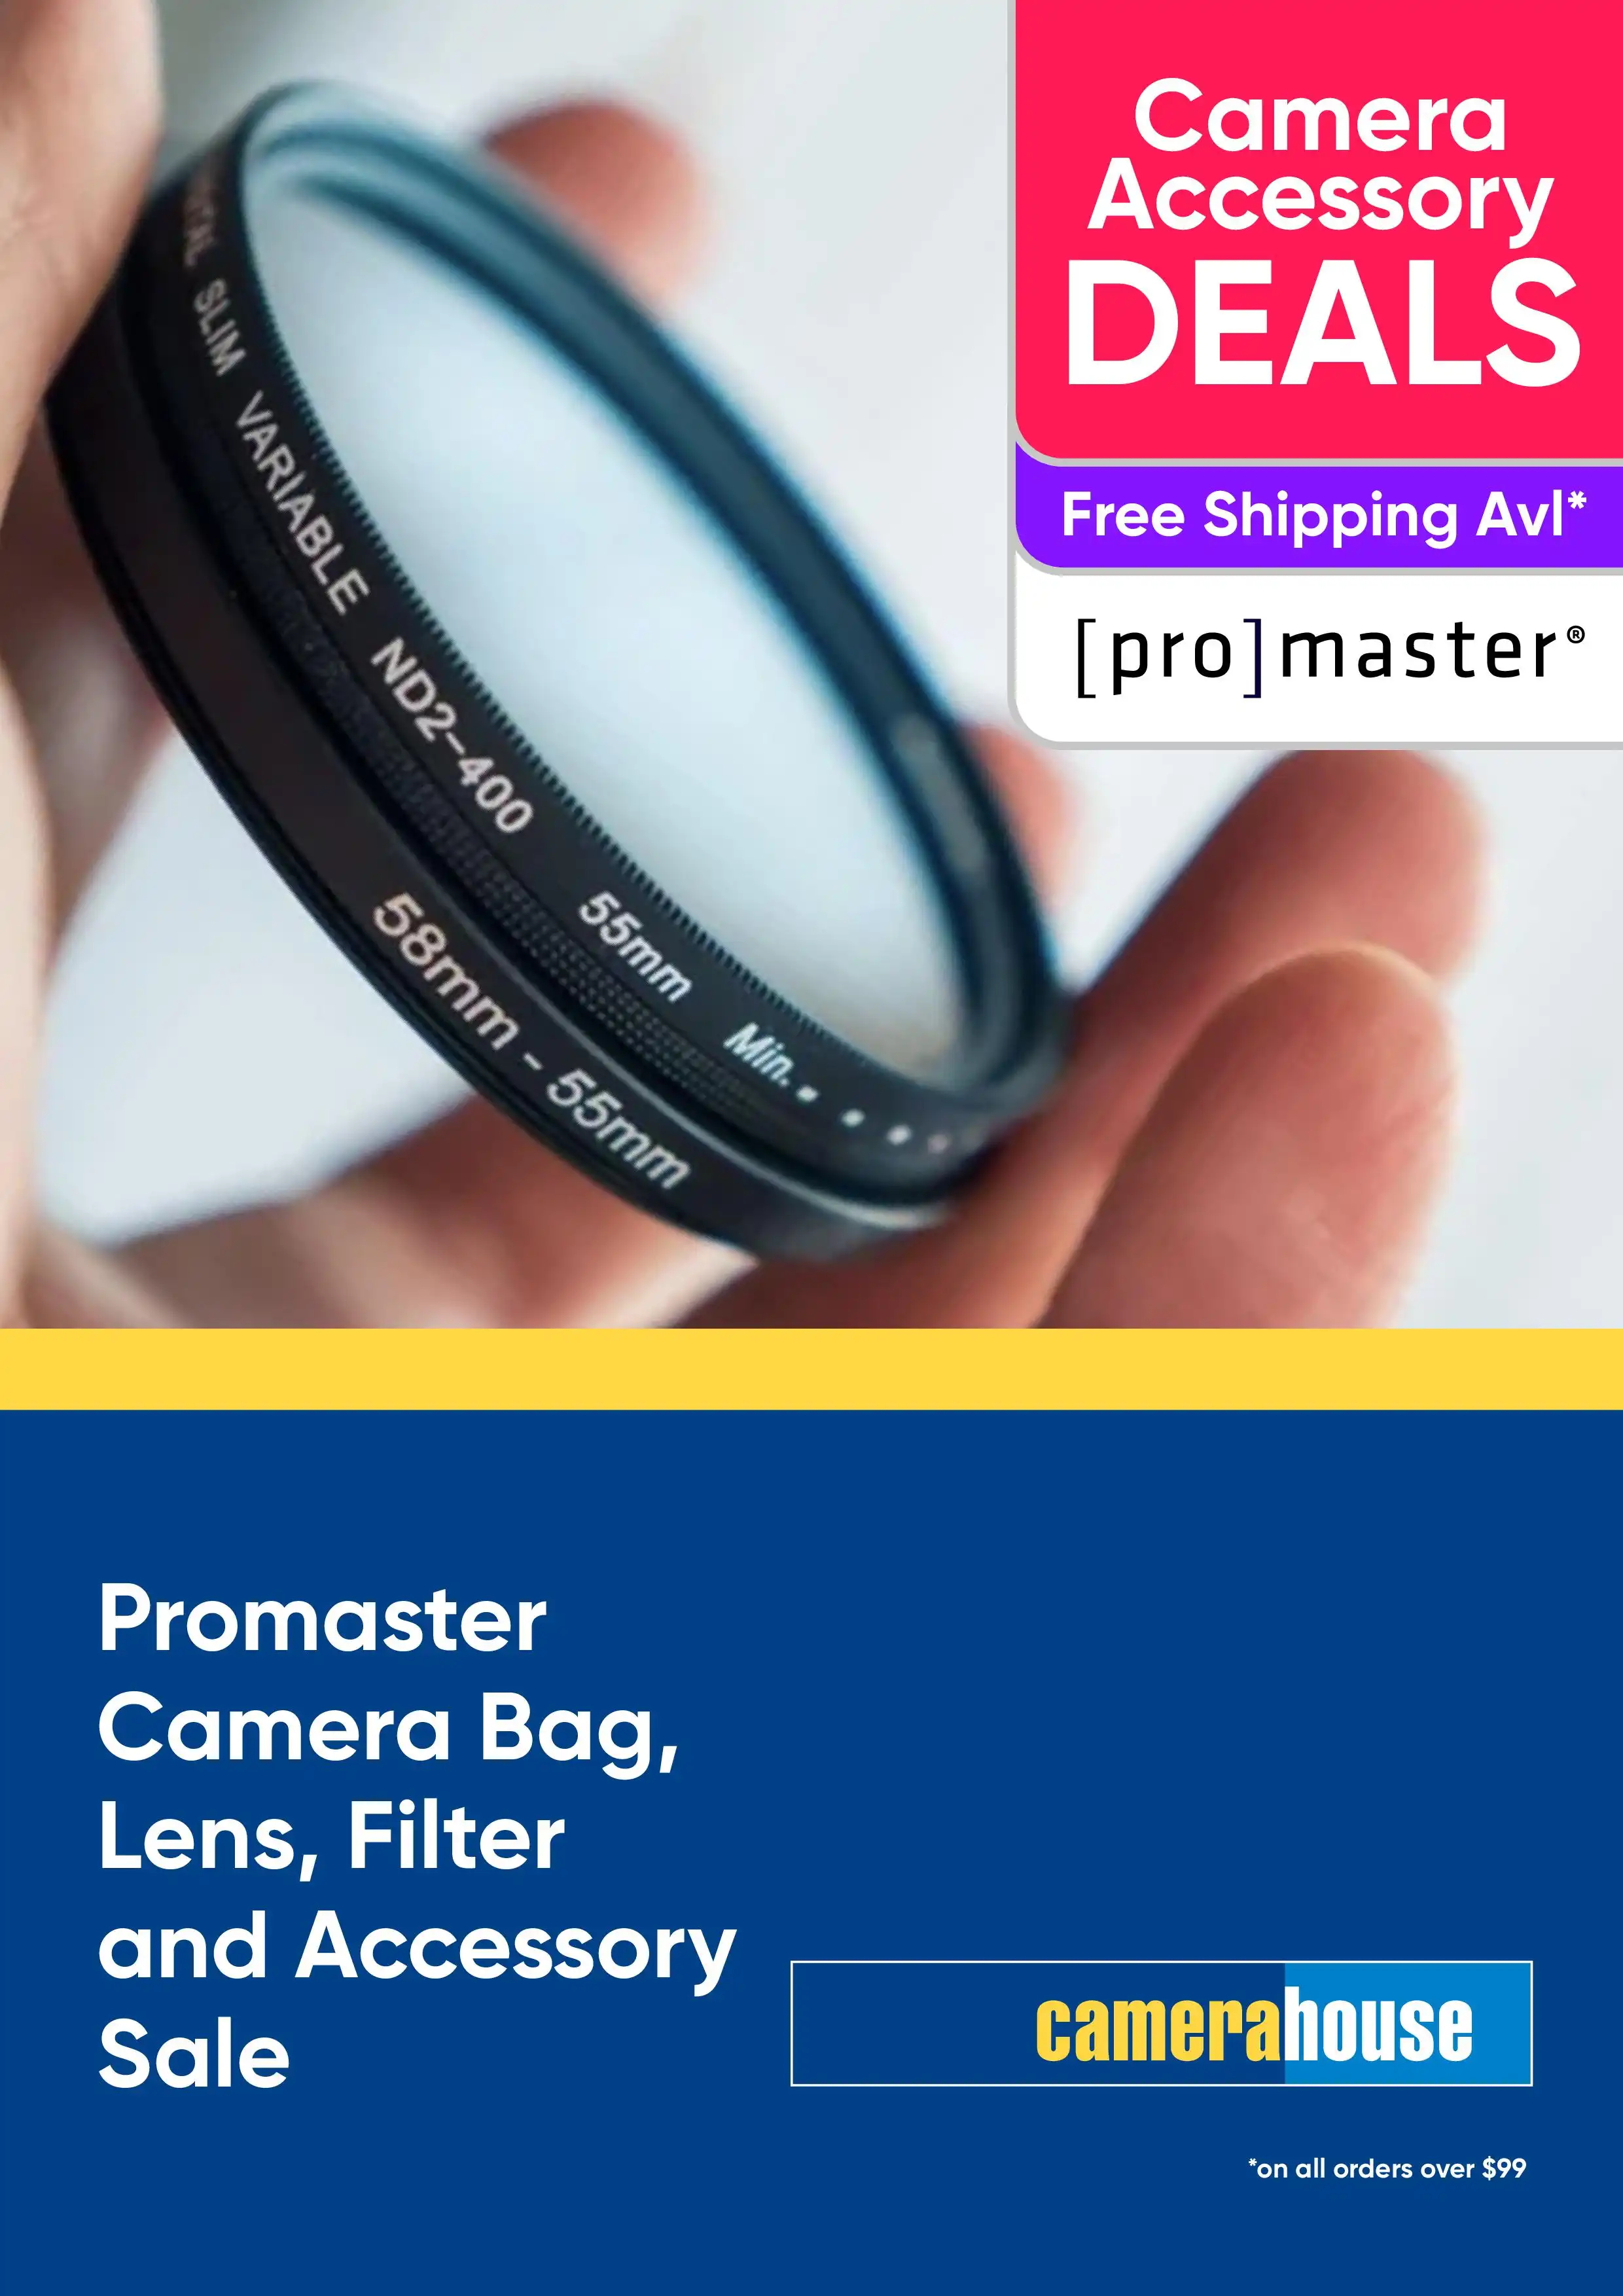 Promaster Camera Bag, Lens, Filter and Accessory Sale